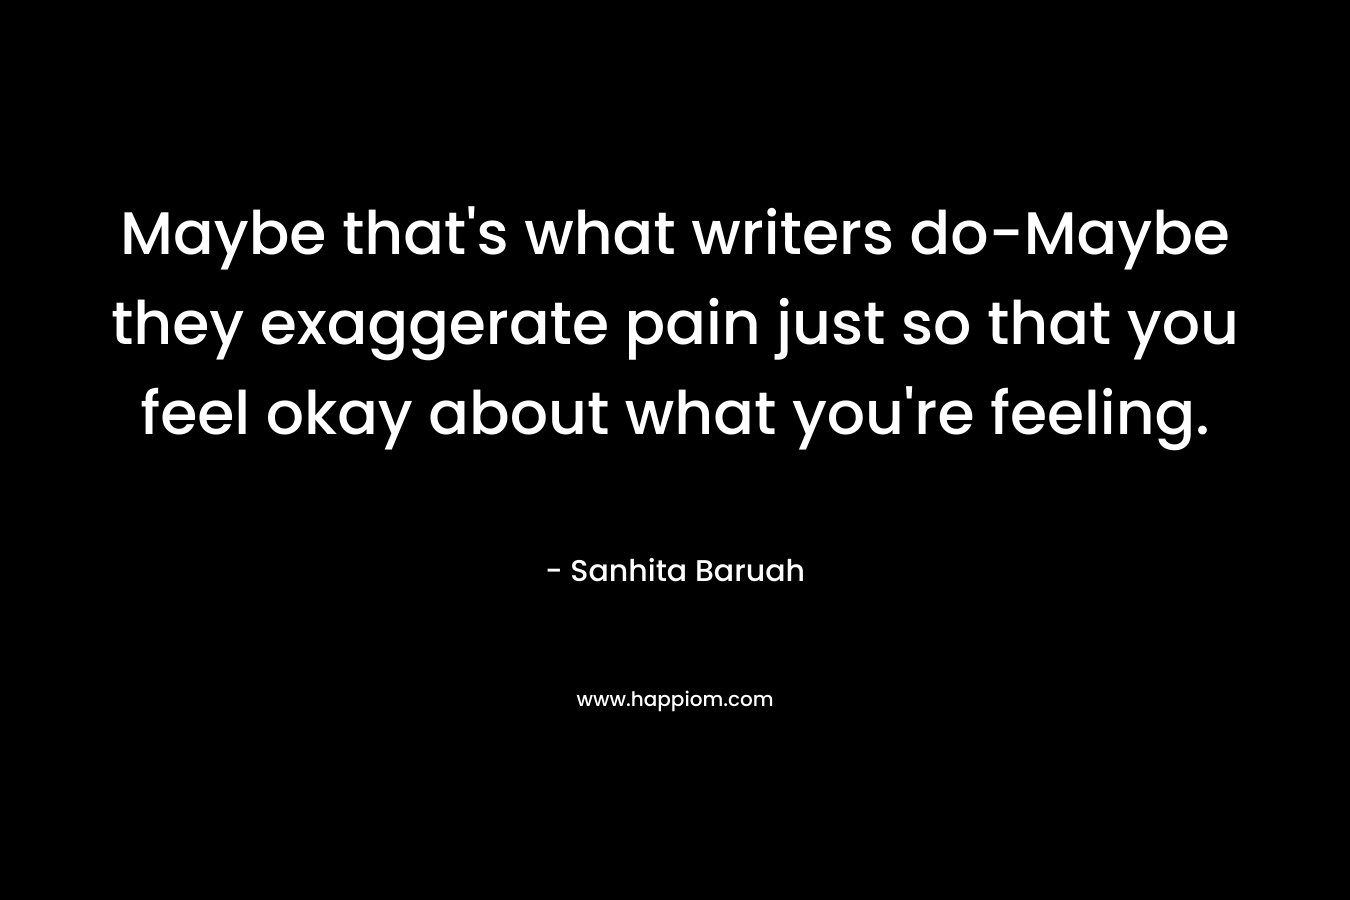 Maybe that's what writers do-Maybe they exaggerate pain just so that you feel okay about what you're feeling.